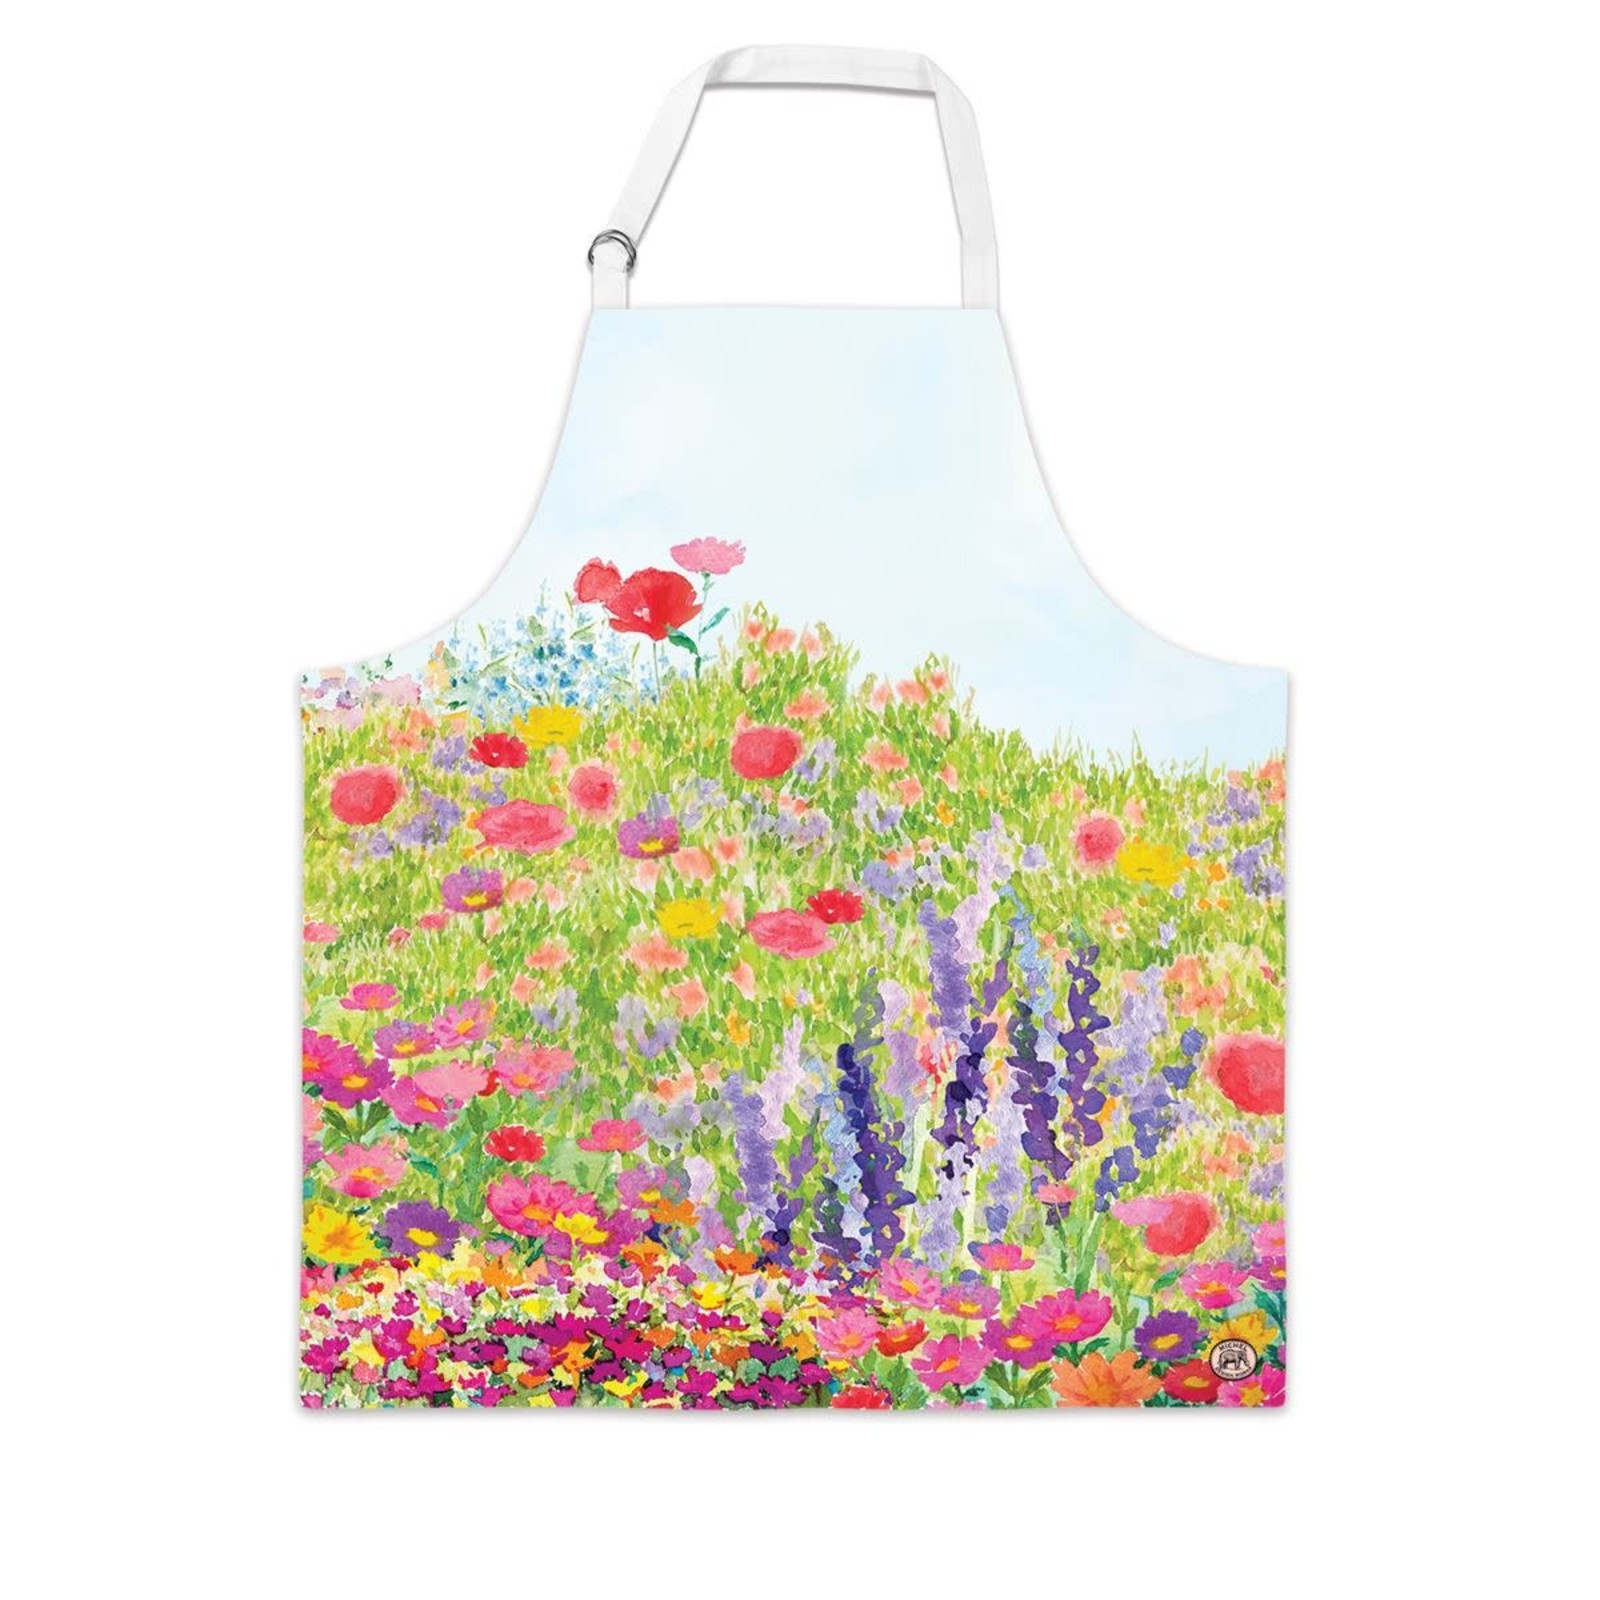 Michel Design Works Apron-The Meadow  APR370 loading=